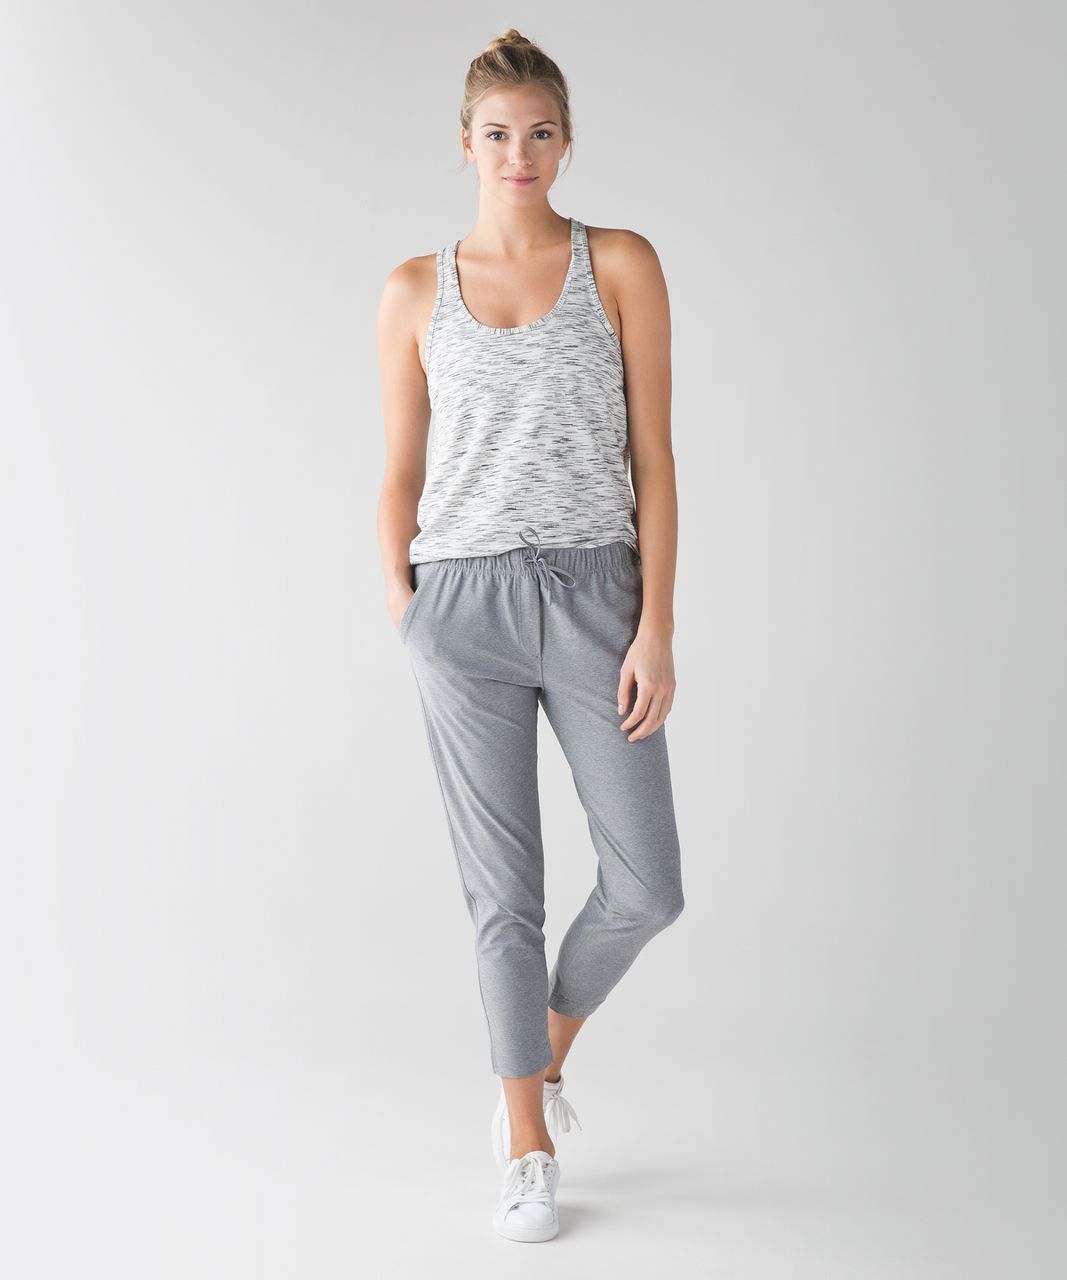 Activewear You Can Wear After Working Out